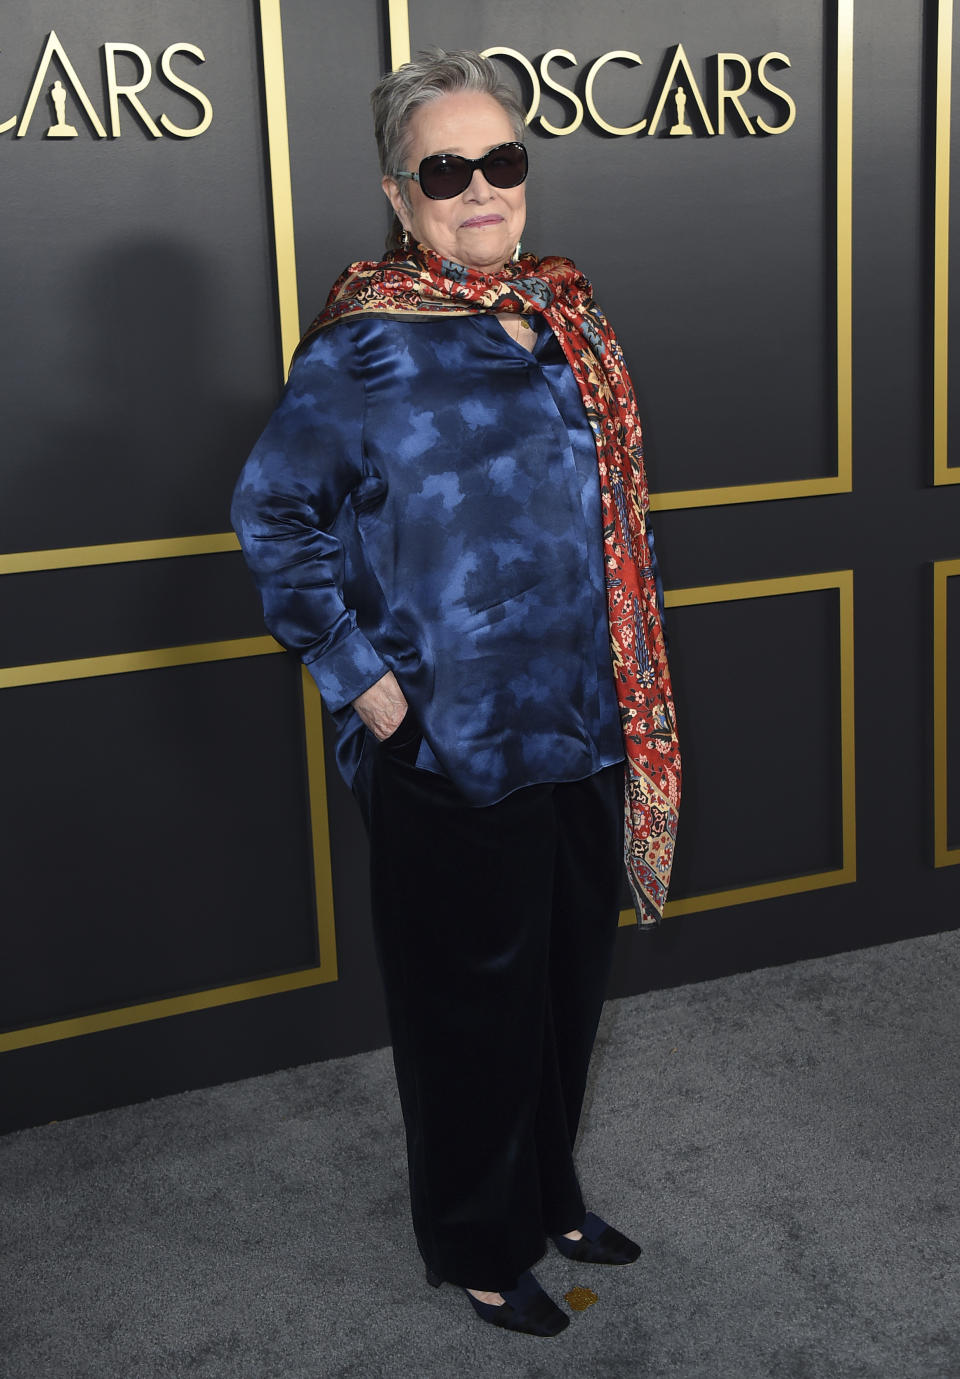 Kathy Bates arrives at the 92nd Academy Awards Nominees Luncheon at the Loews Hotel on Monday, Jan. 27, 2020, in Los Angeles. (Photo by Jordan Strauss/Invision/AP)